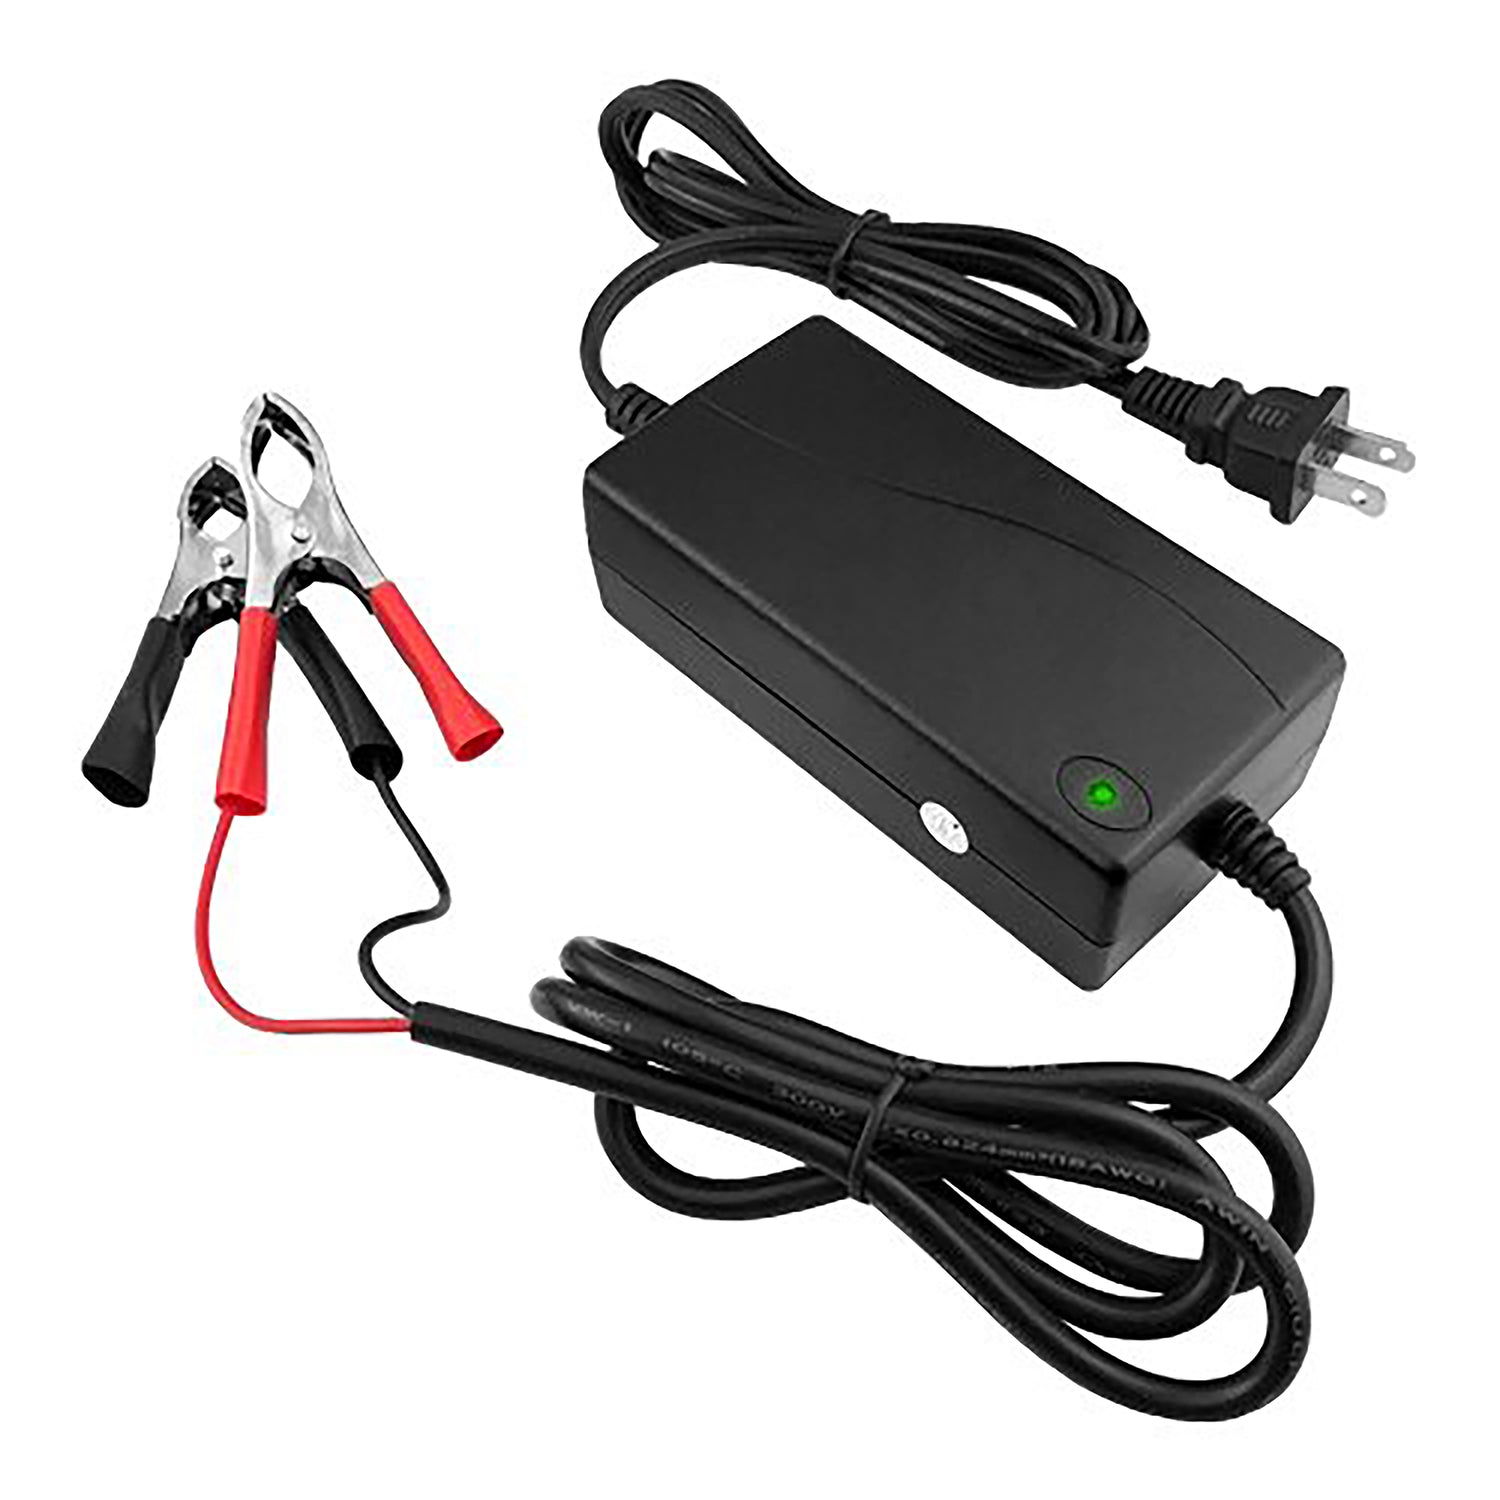 12V-4AMP BATTERY CHARGER MAINTAINER